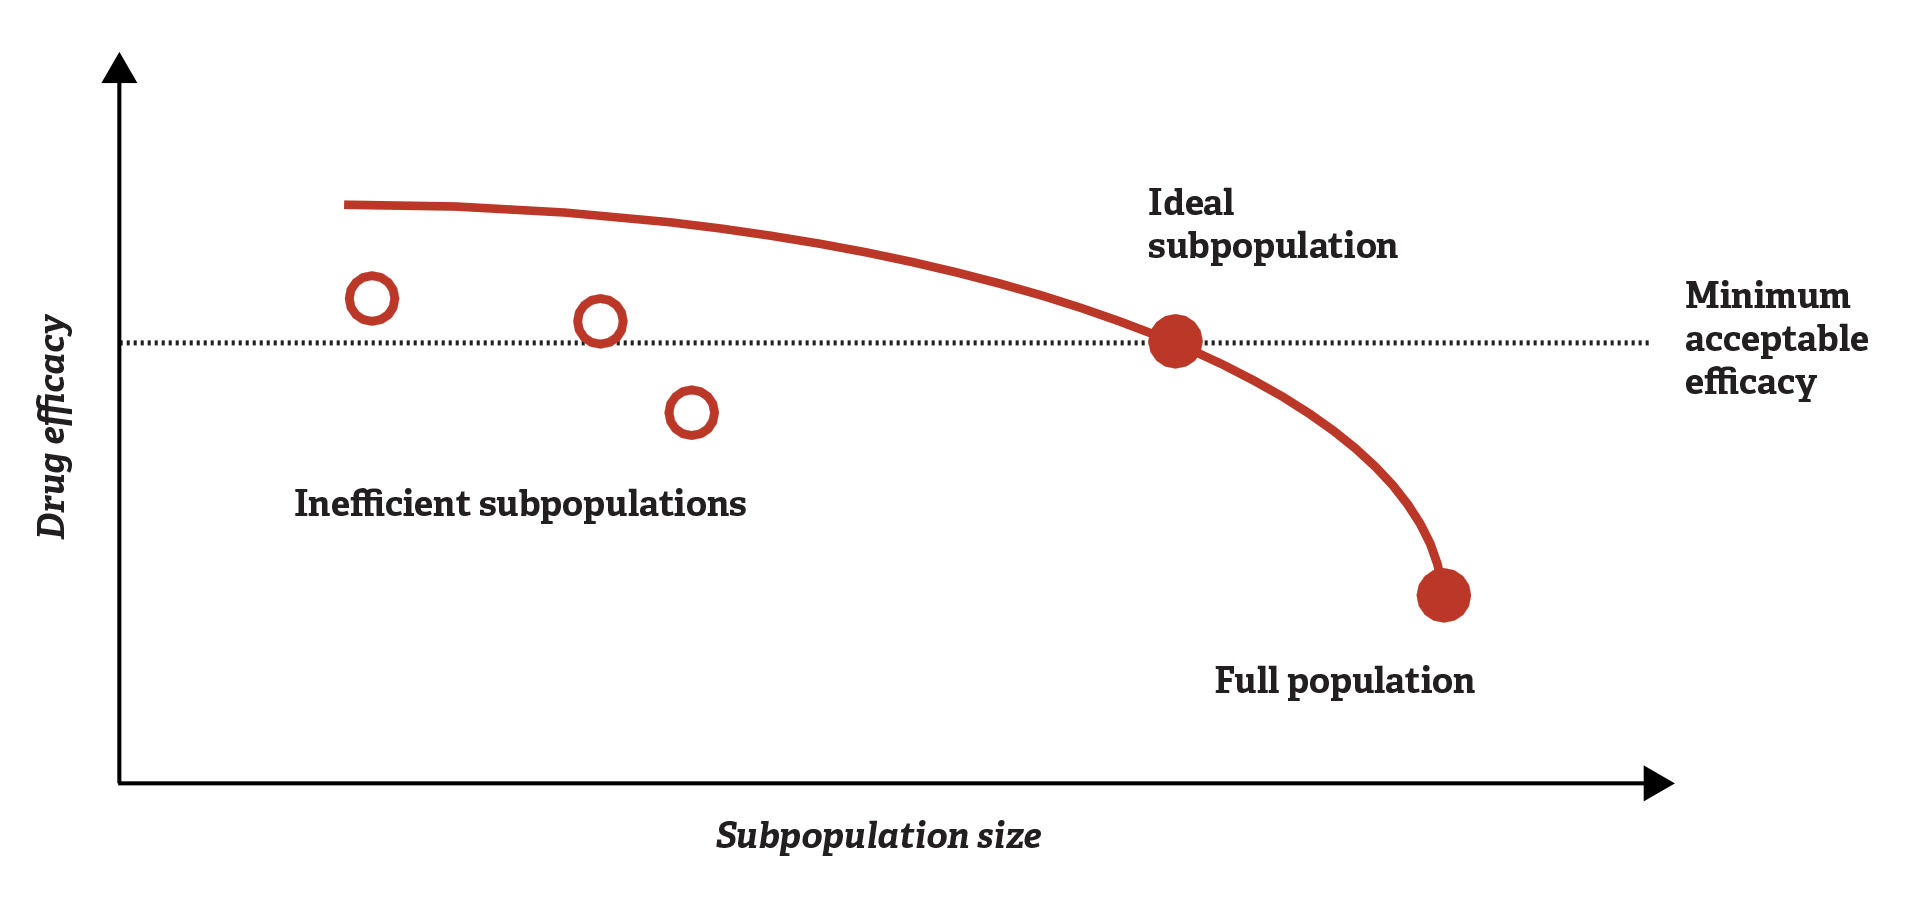 Figure 3. The Tradeoff between Drug Efficacy and Subpopulation Size